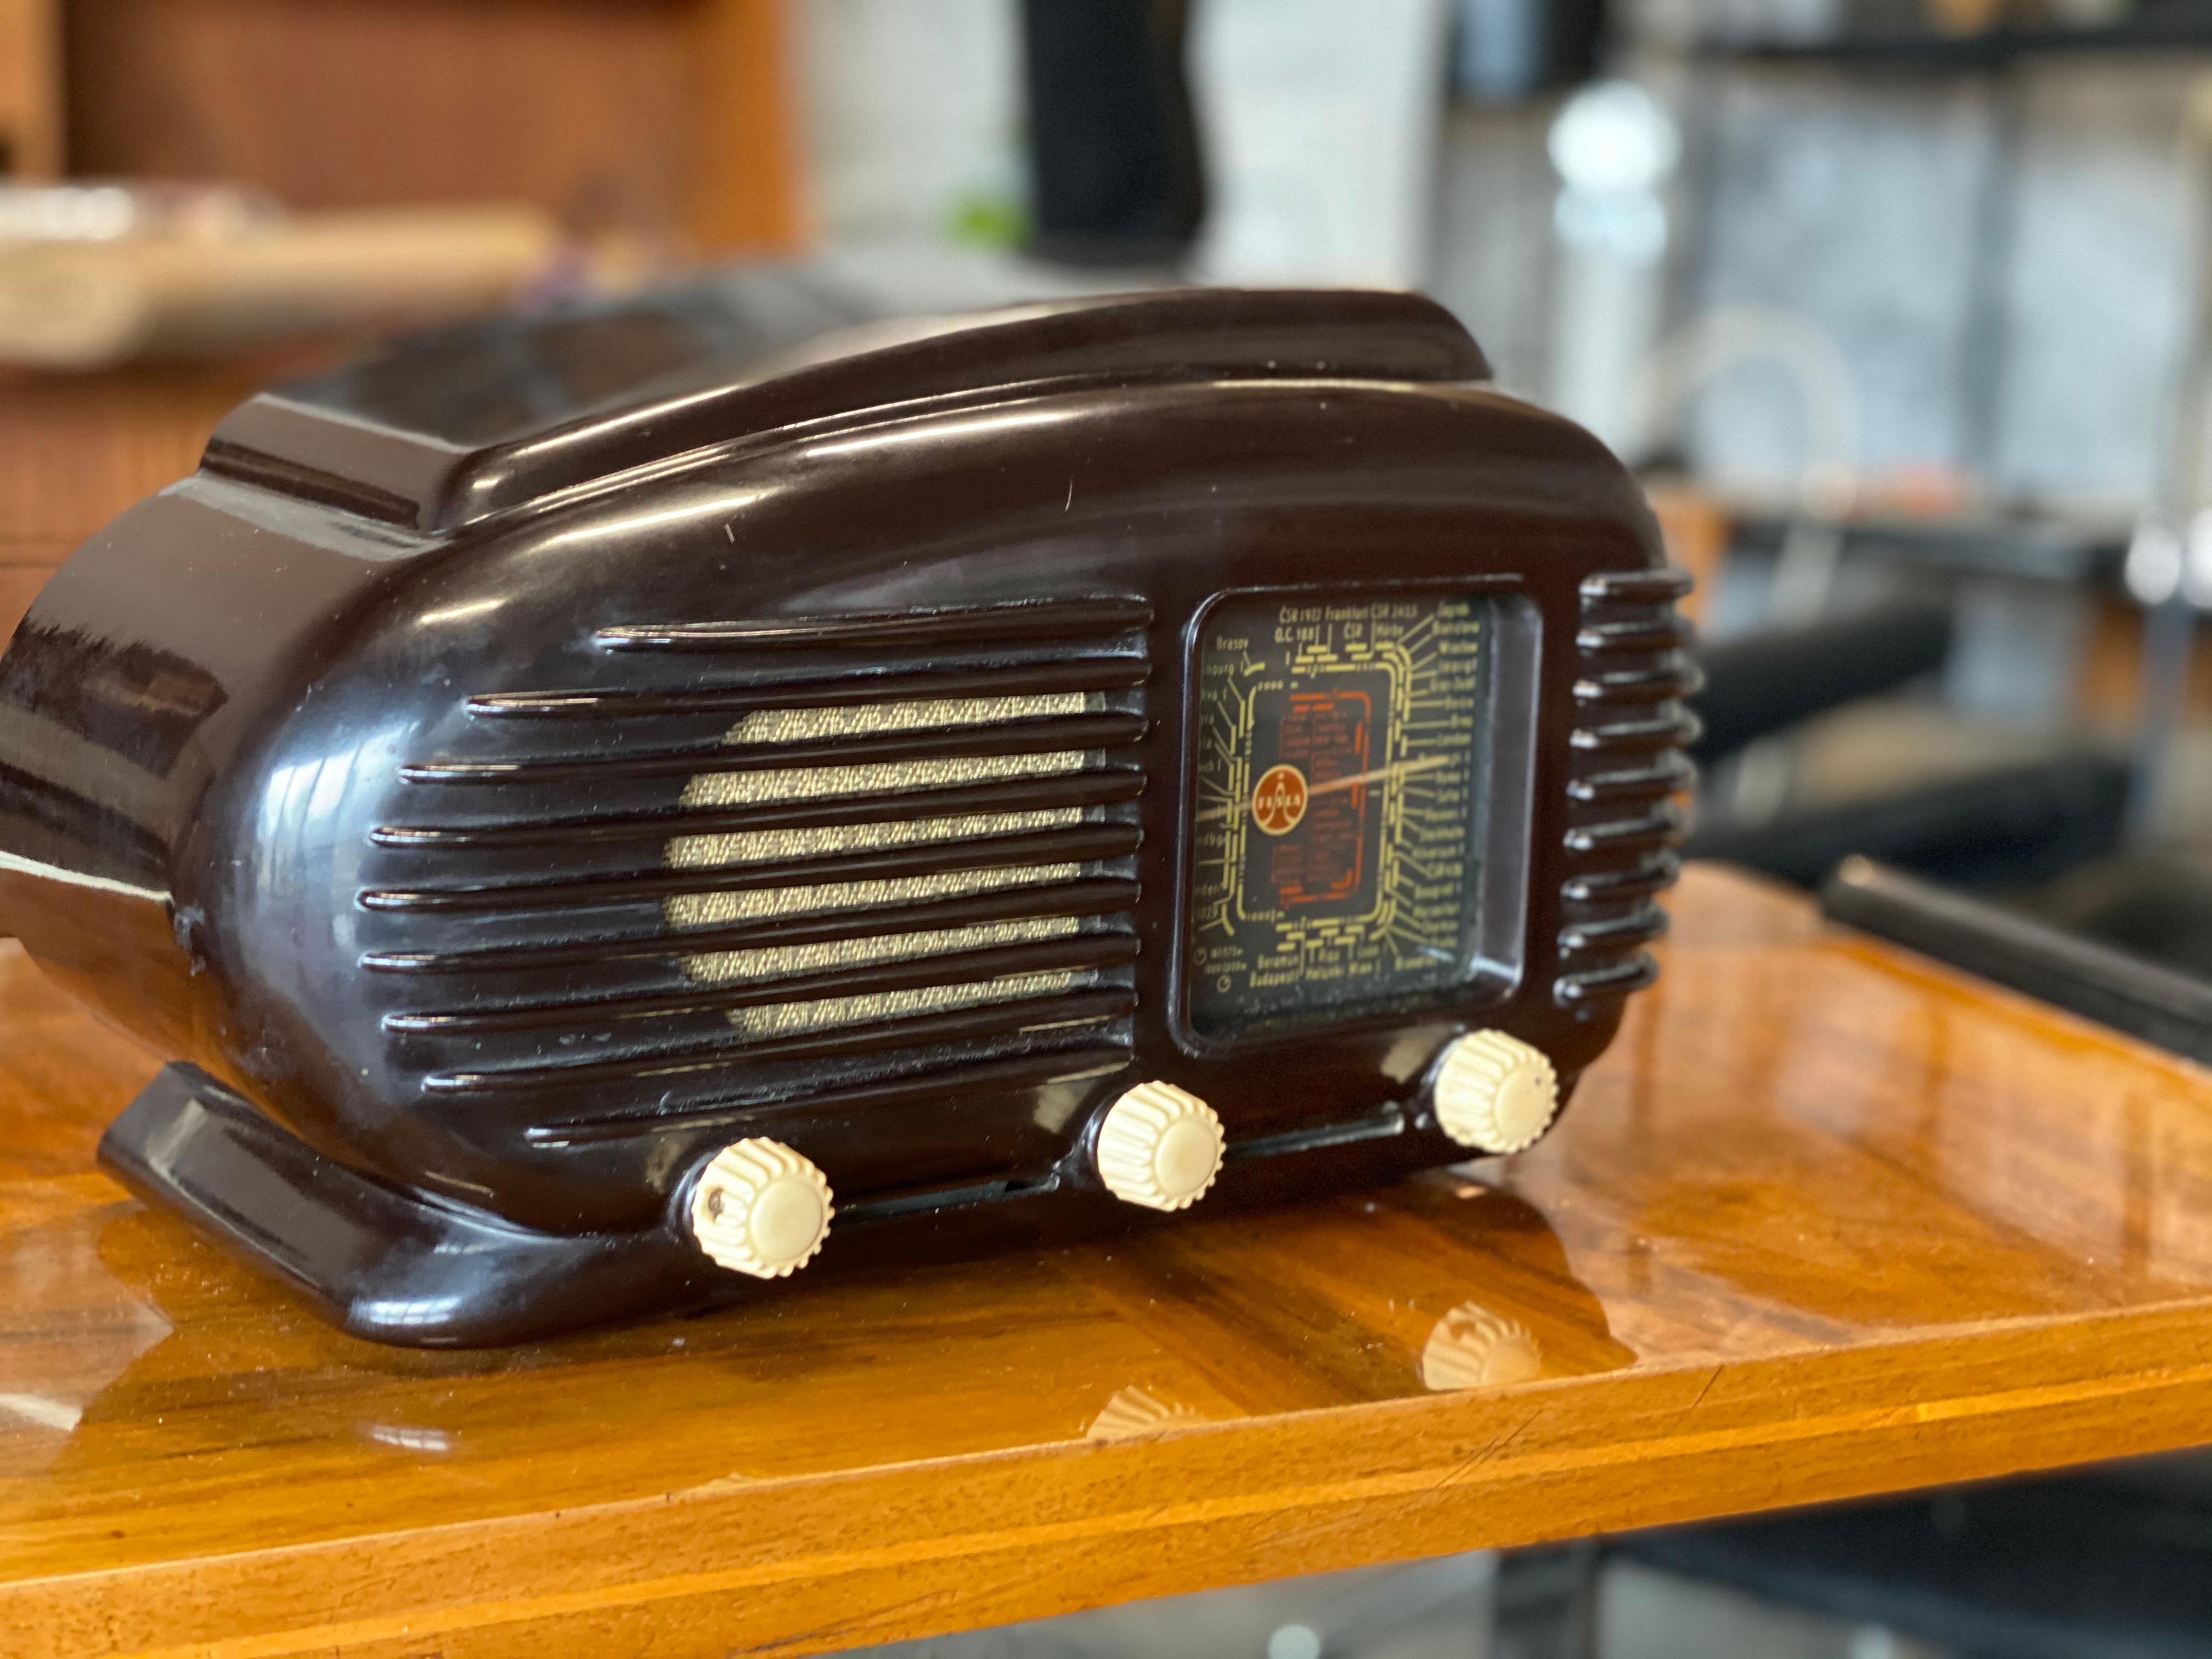 Talisman Radio by the Tesla company from the 1950s. A compact tabletop receiver in a streamlined design fondly referred to as the 